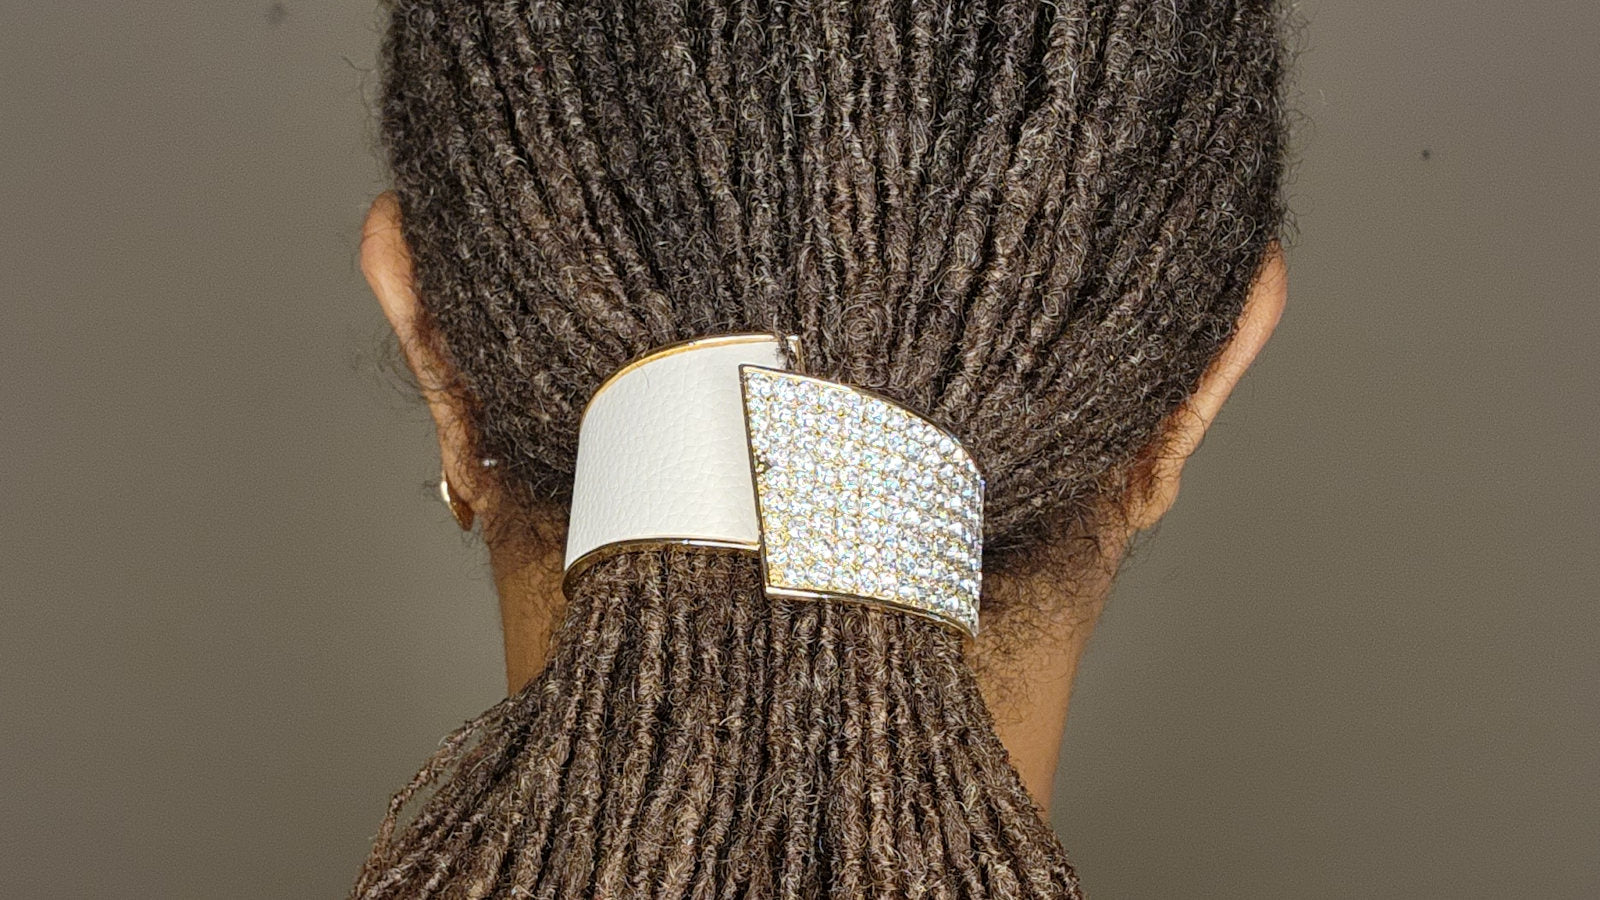  Golden Wings Hair Cuff for your locs, braids or natural hair.